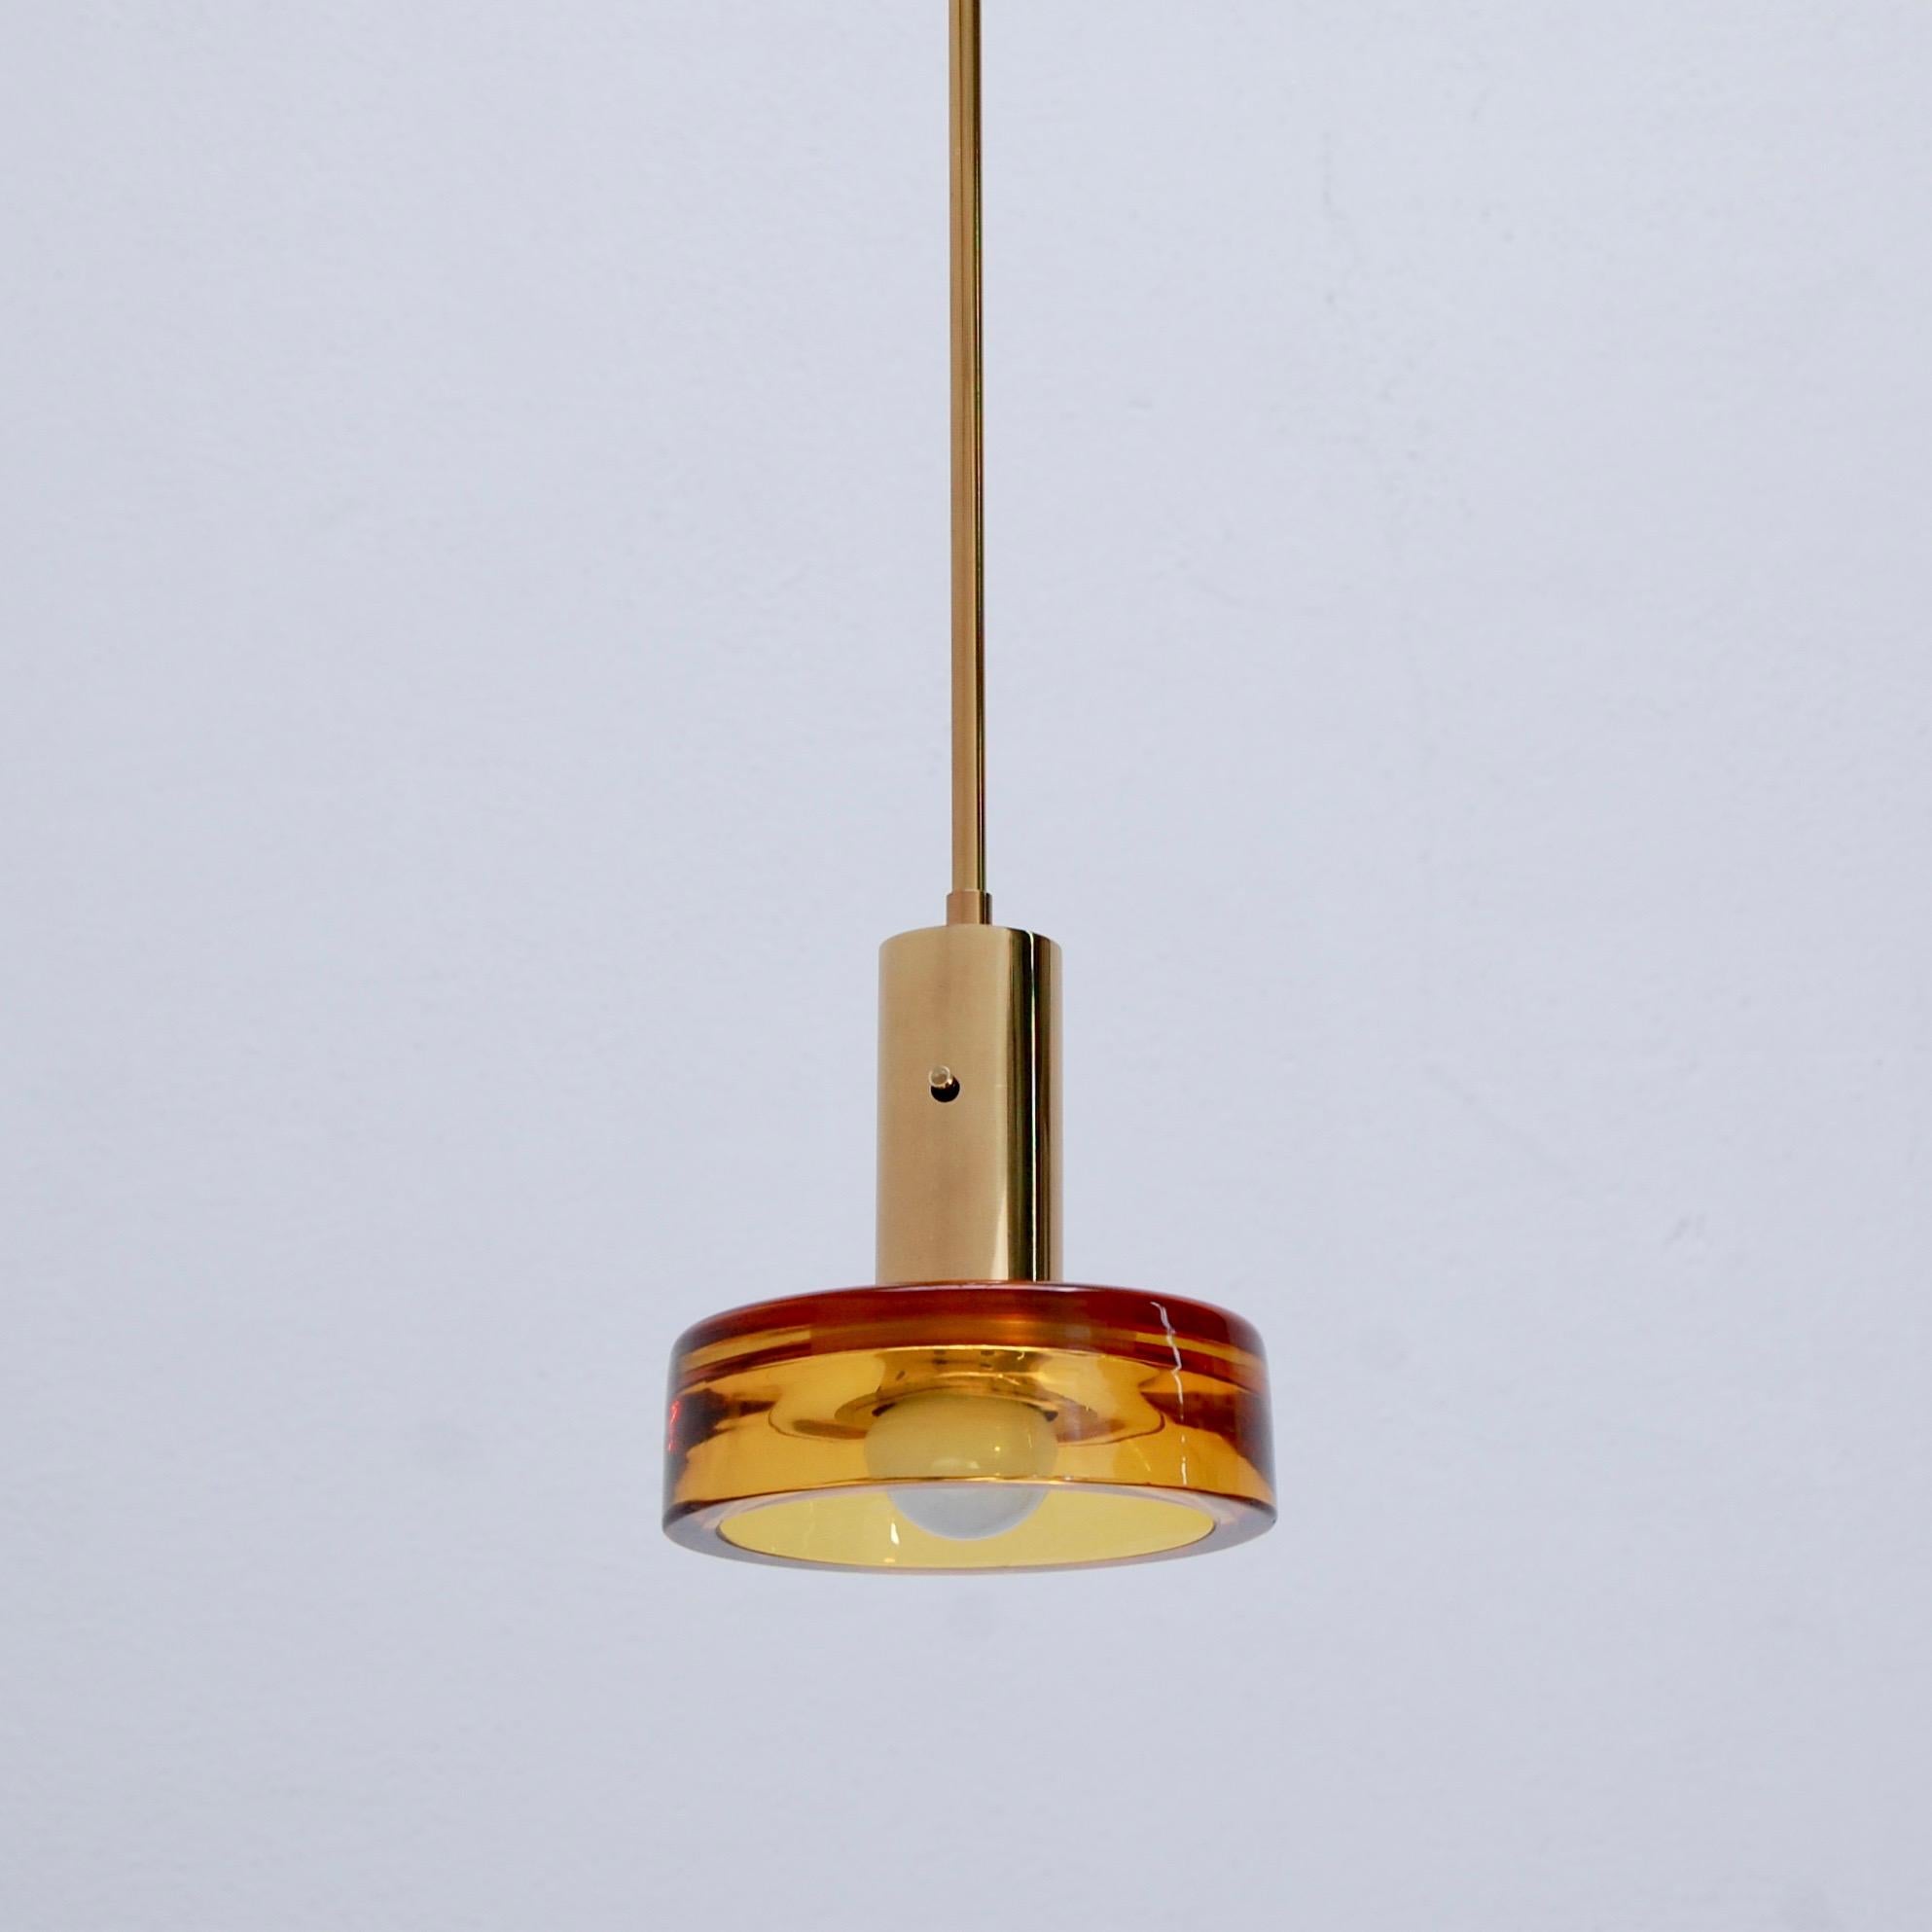 Pair of beautiful glass and brass pendants by Seguso of Italy. Seguso glass in sapphire blue and amber. Patina lacquered brass and partially restored. Each pendant is wired with a single E26 medium based socket for use in the US. Light bulbs